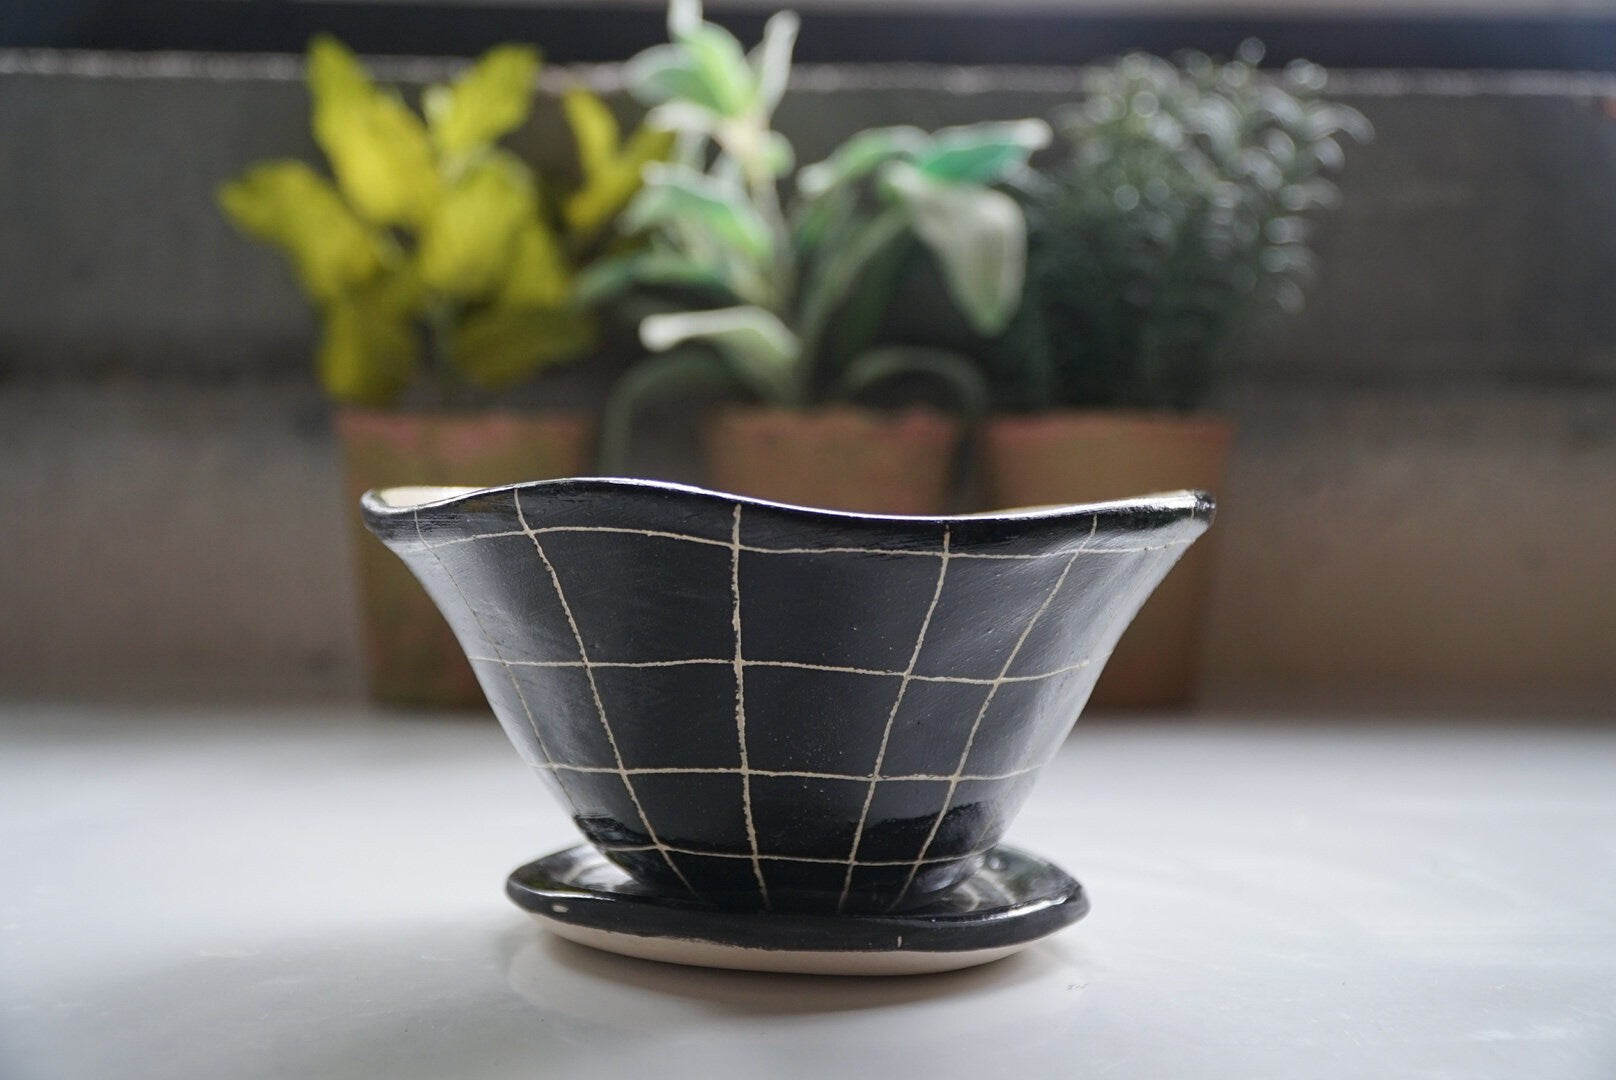 Black and White Glazed Table Planter w/ "Grid" Design - Matching Tray - Succulent Planter - Small Plant Pot - Propagating Planter - Housewarming